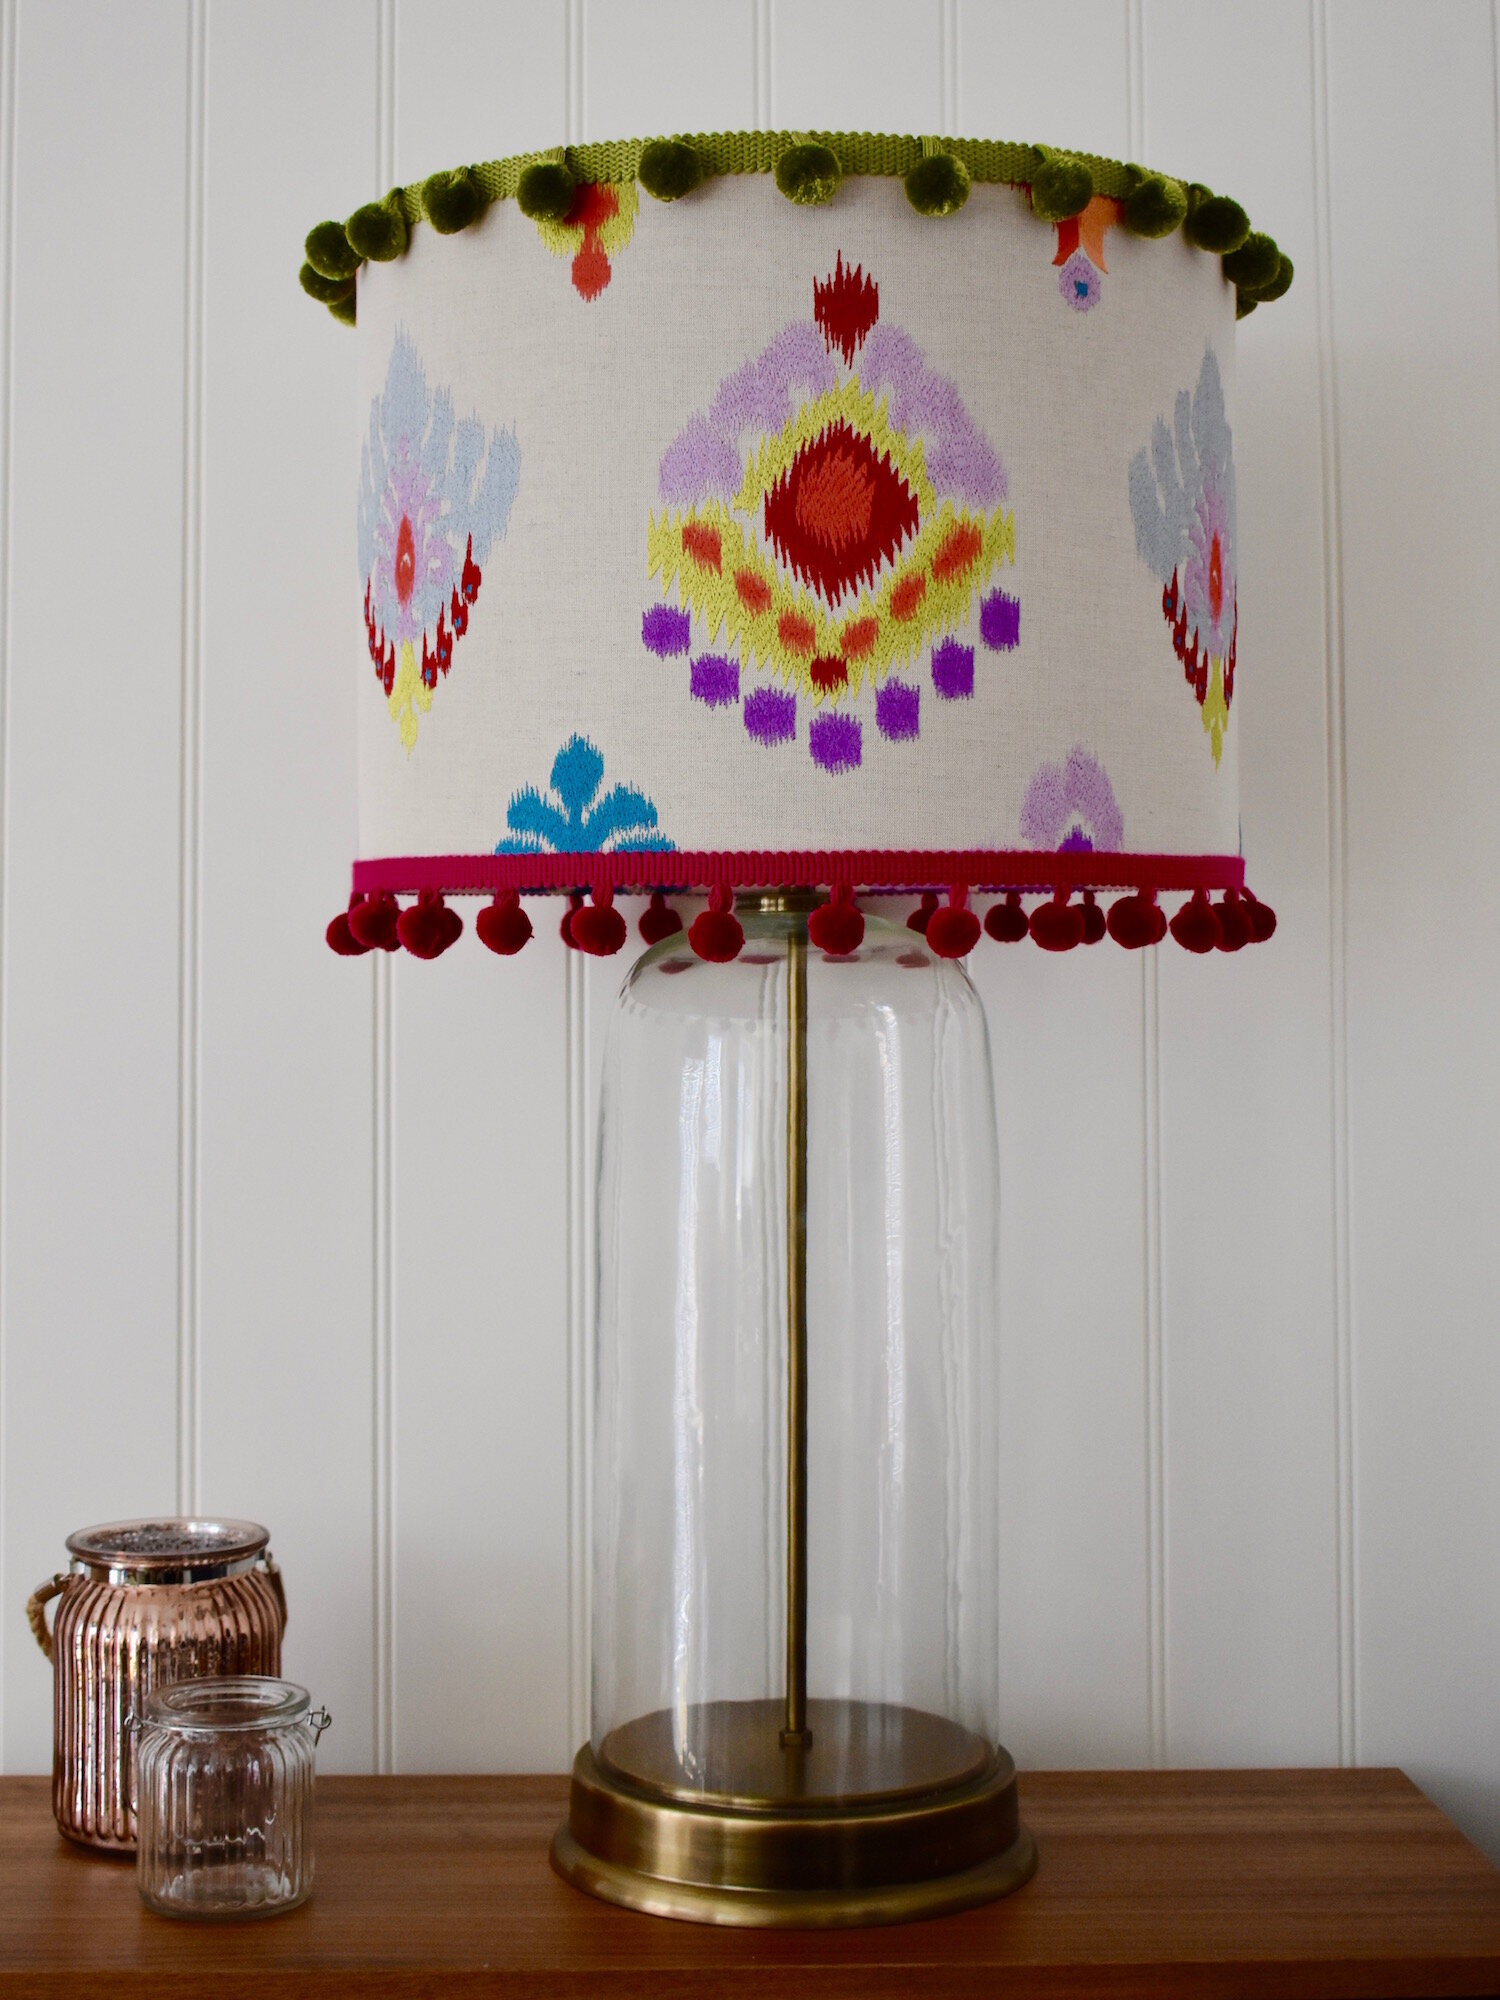 Bespoke Lampshades using Jane Churchill fabric - customers own material with added  pompom trim